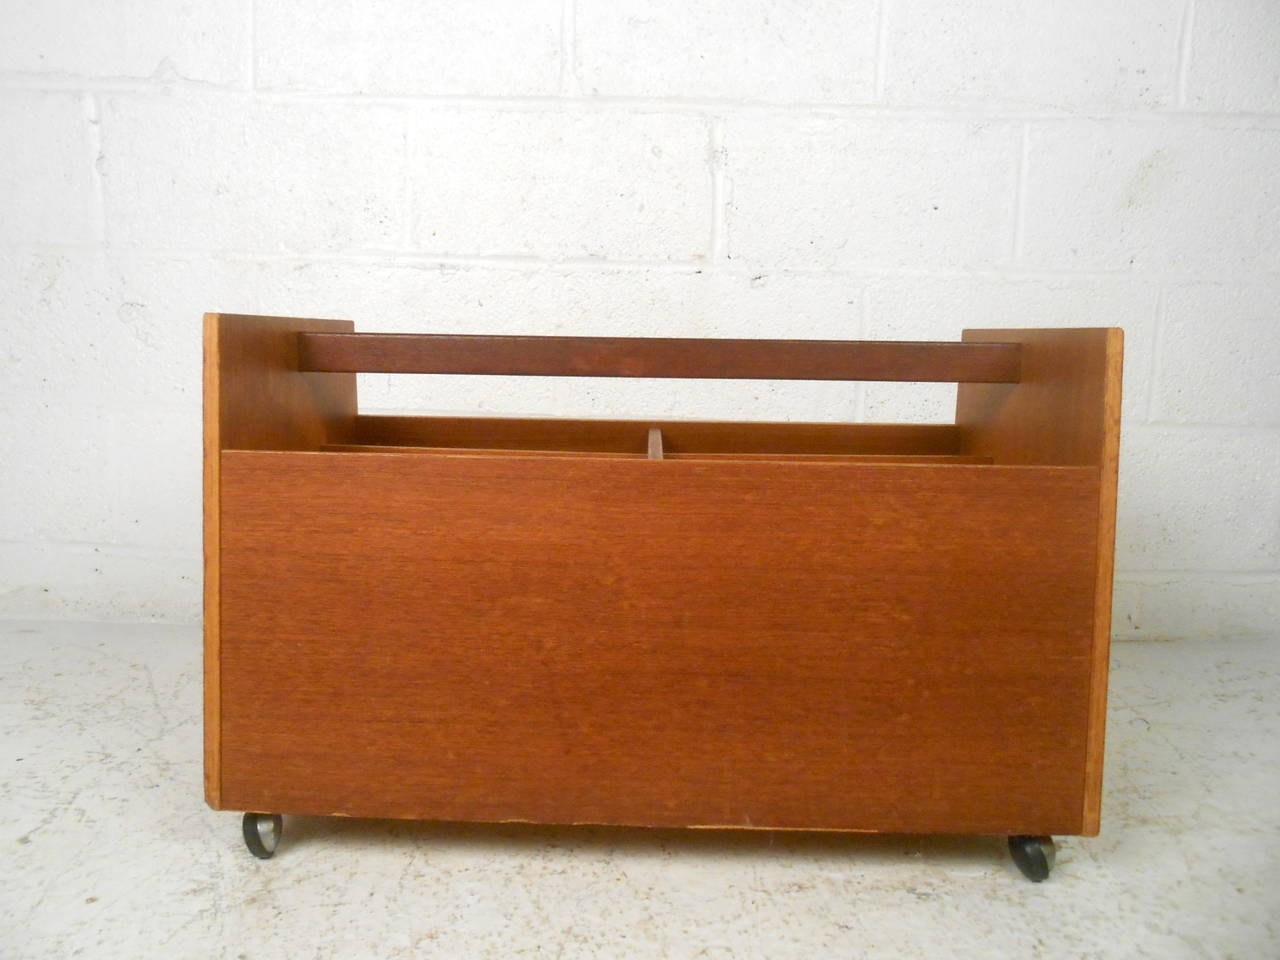 This Mid-Century magazine caddy features a beautiful teak construction, chrome castors, and six storage compartments which offers a modern accent to any home or office space.

Please confirm item location (NY or NJ) with dealer.